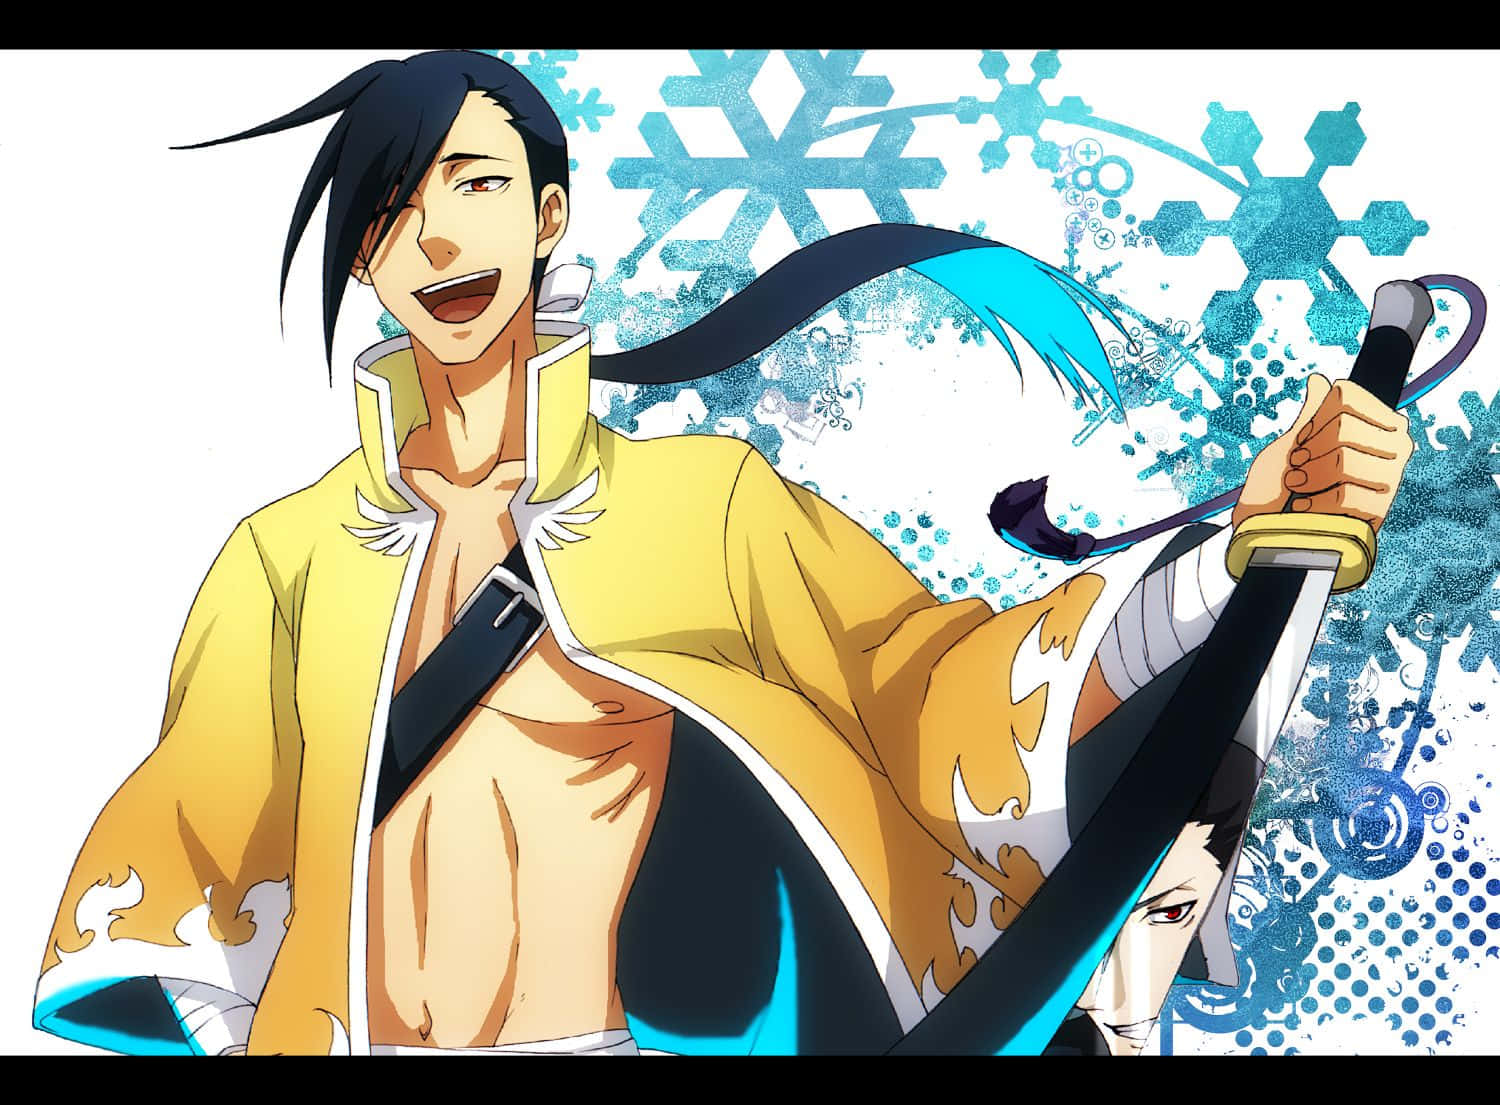 Ling Yao, the charismatic prince of Xing, standing with a determined look in his eyes. Wallpaper